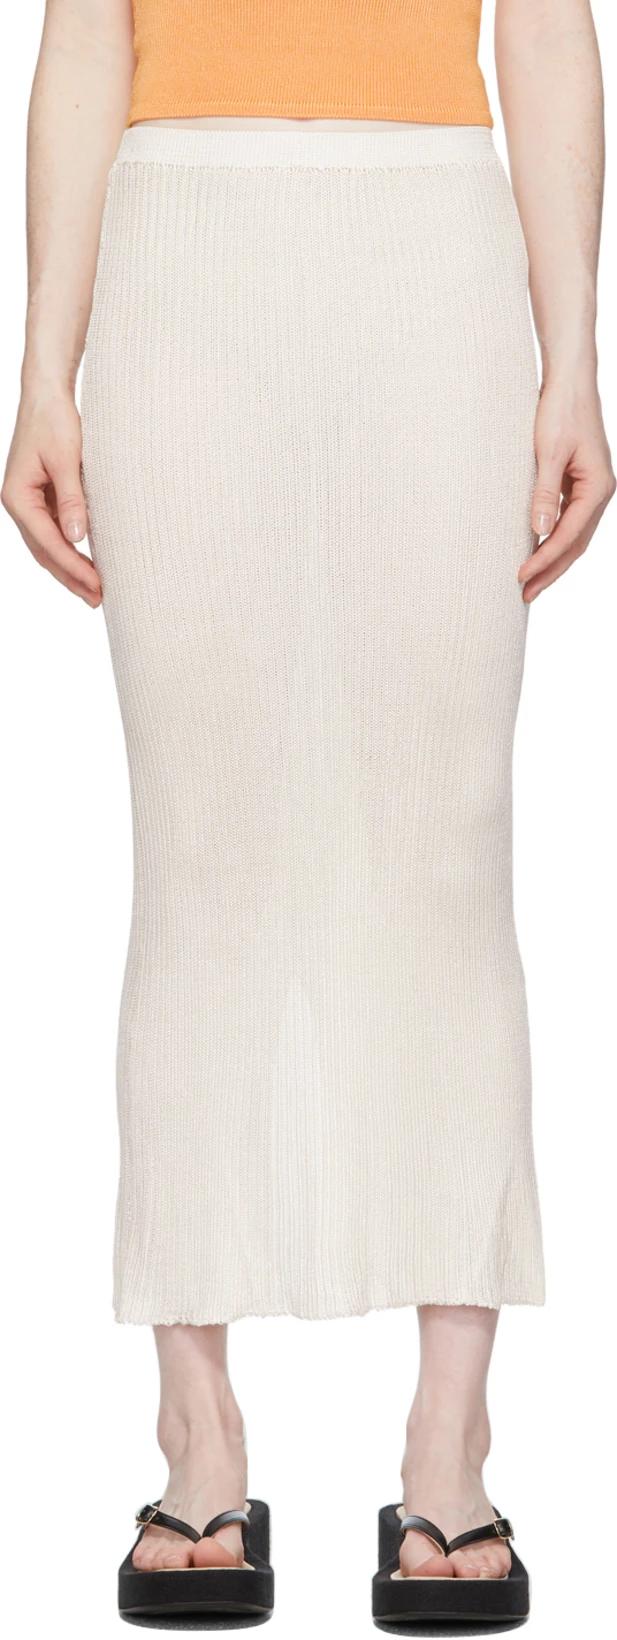 Off-White Ribbed Skirt by CALLE DEL MAR